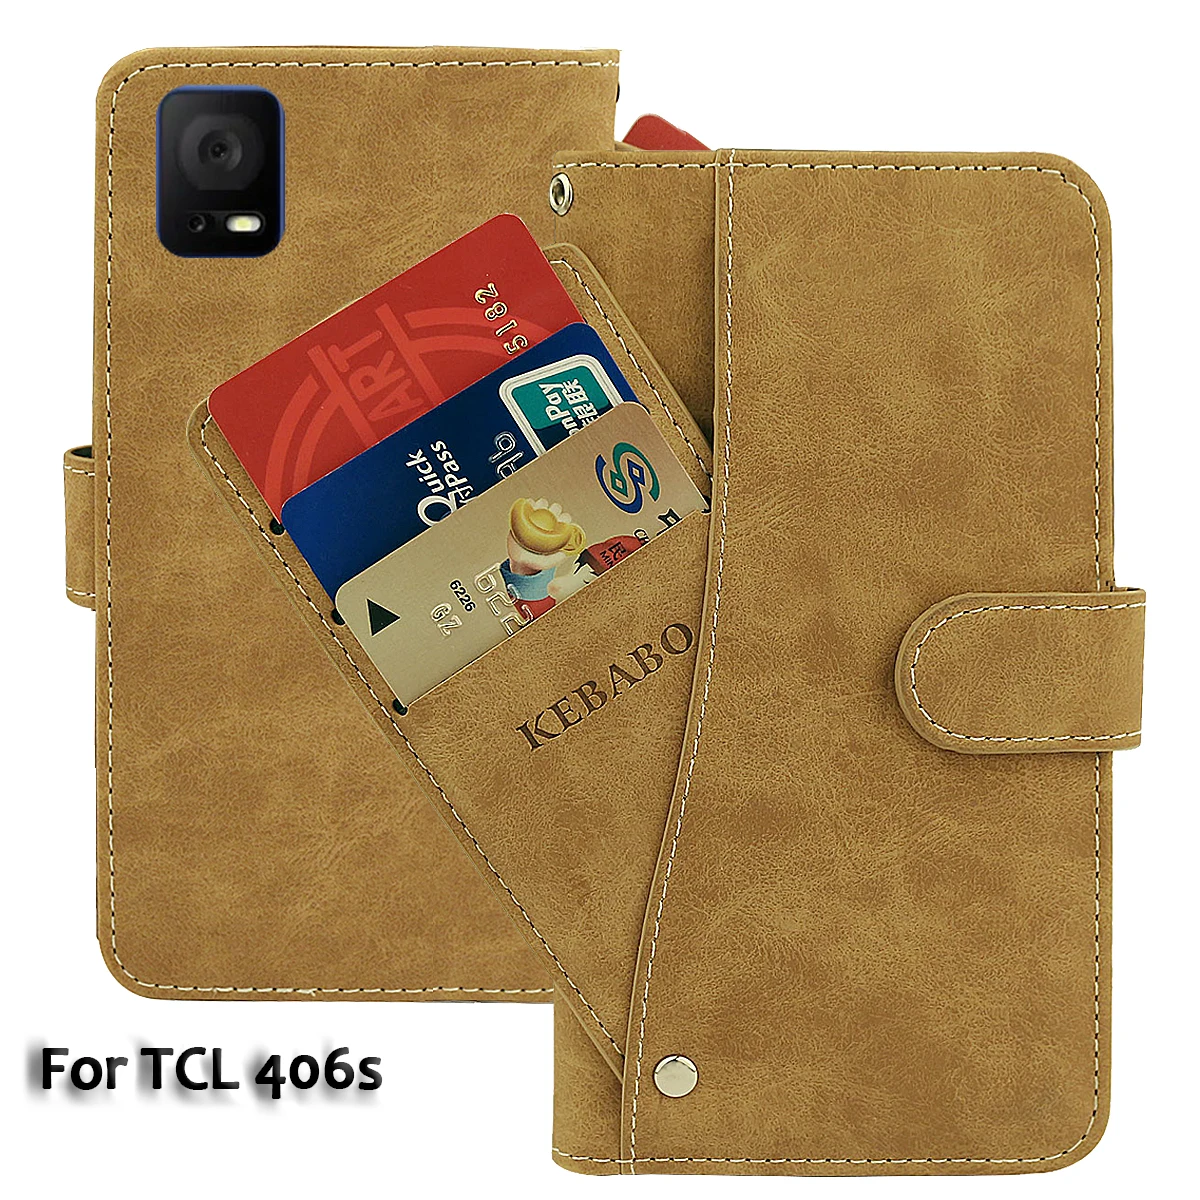 

Vintage Leather Wallet TCL 406s Case 6.6" Flip Luxury Card Slots Cover Magnet Phone Protective Cases Bags